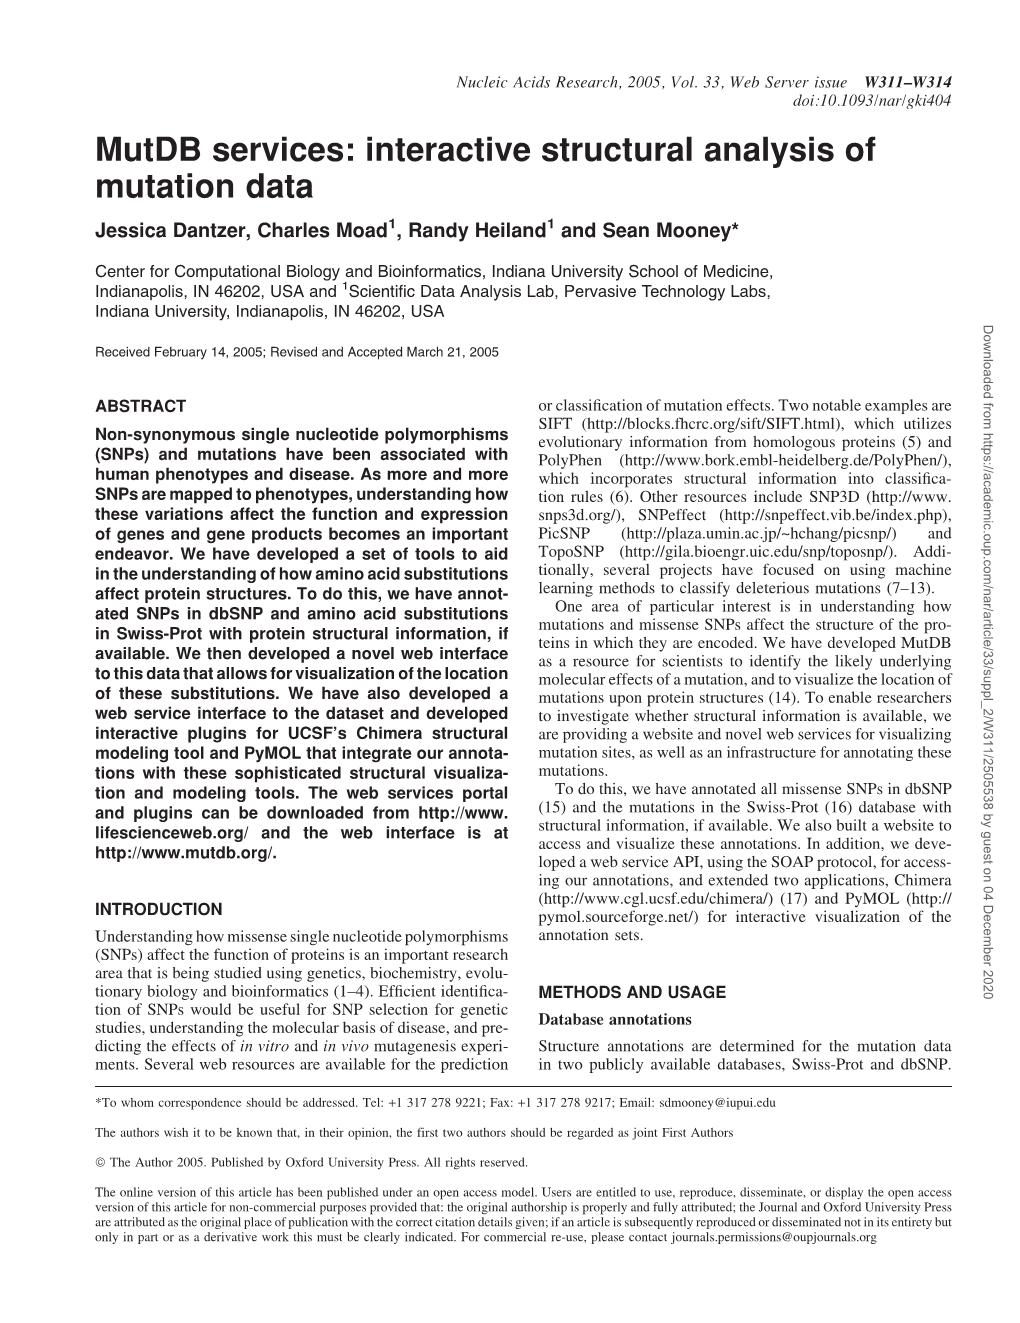 Mutdb Services: Interactive Structural Analysis of Mutation Data Jessica Dantzer, Charles Moad1, Randy Heiland1 and Sean Mooney*